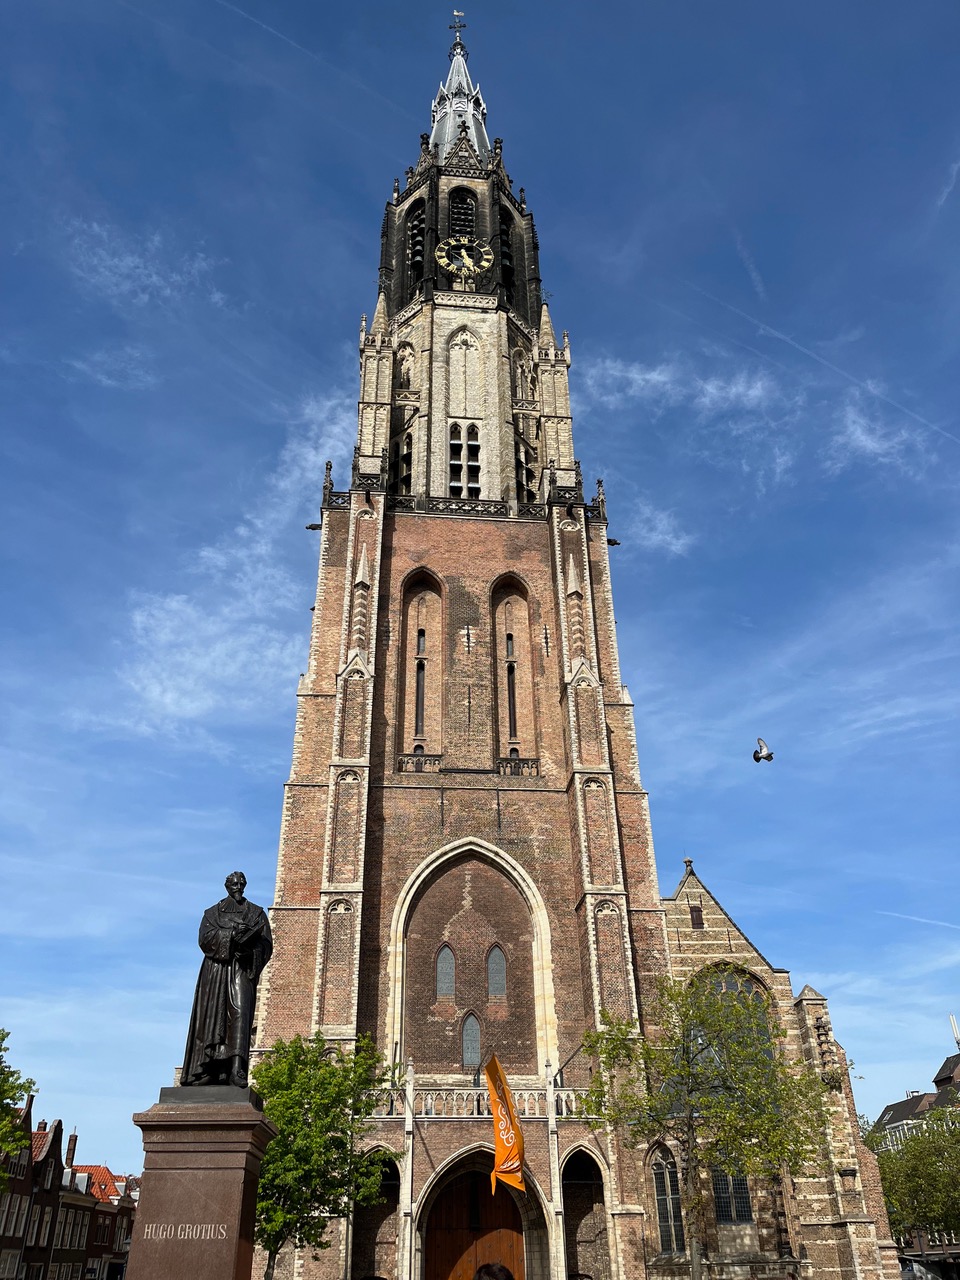 Tower of the New Church in Delft with a bird in a clear blue sky